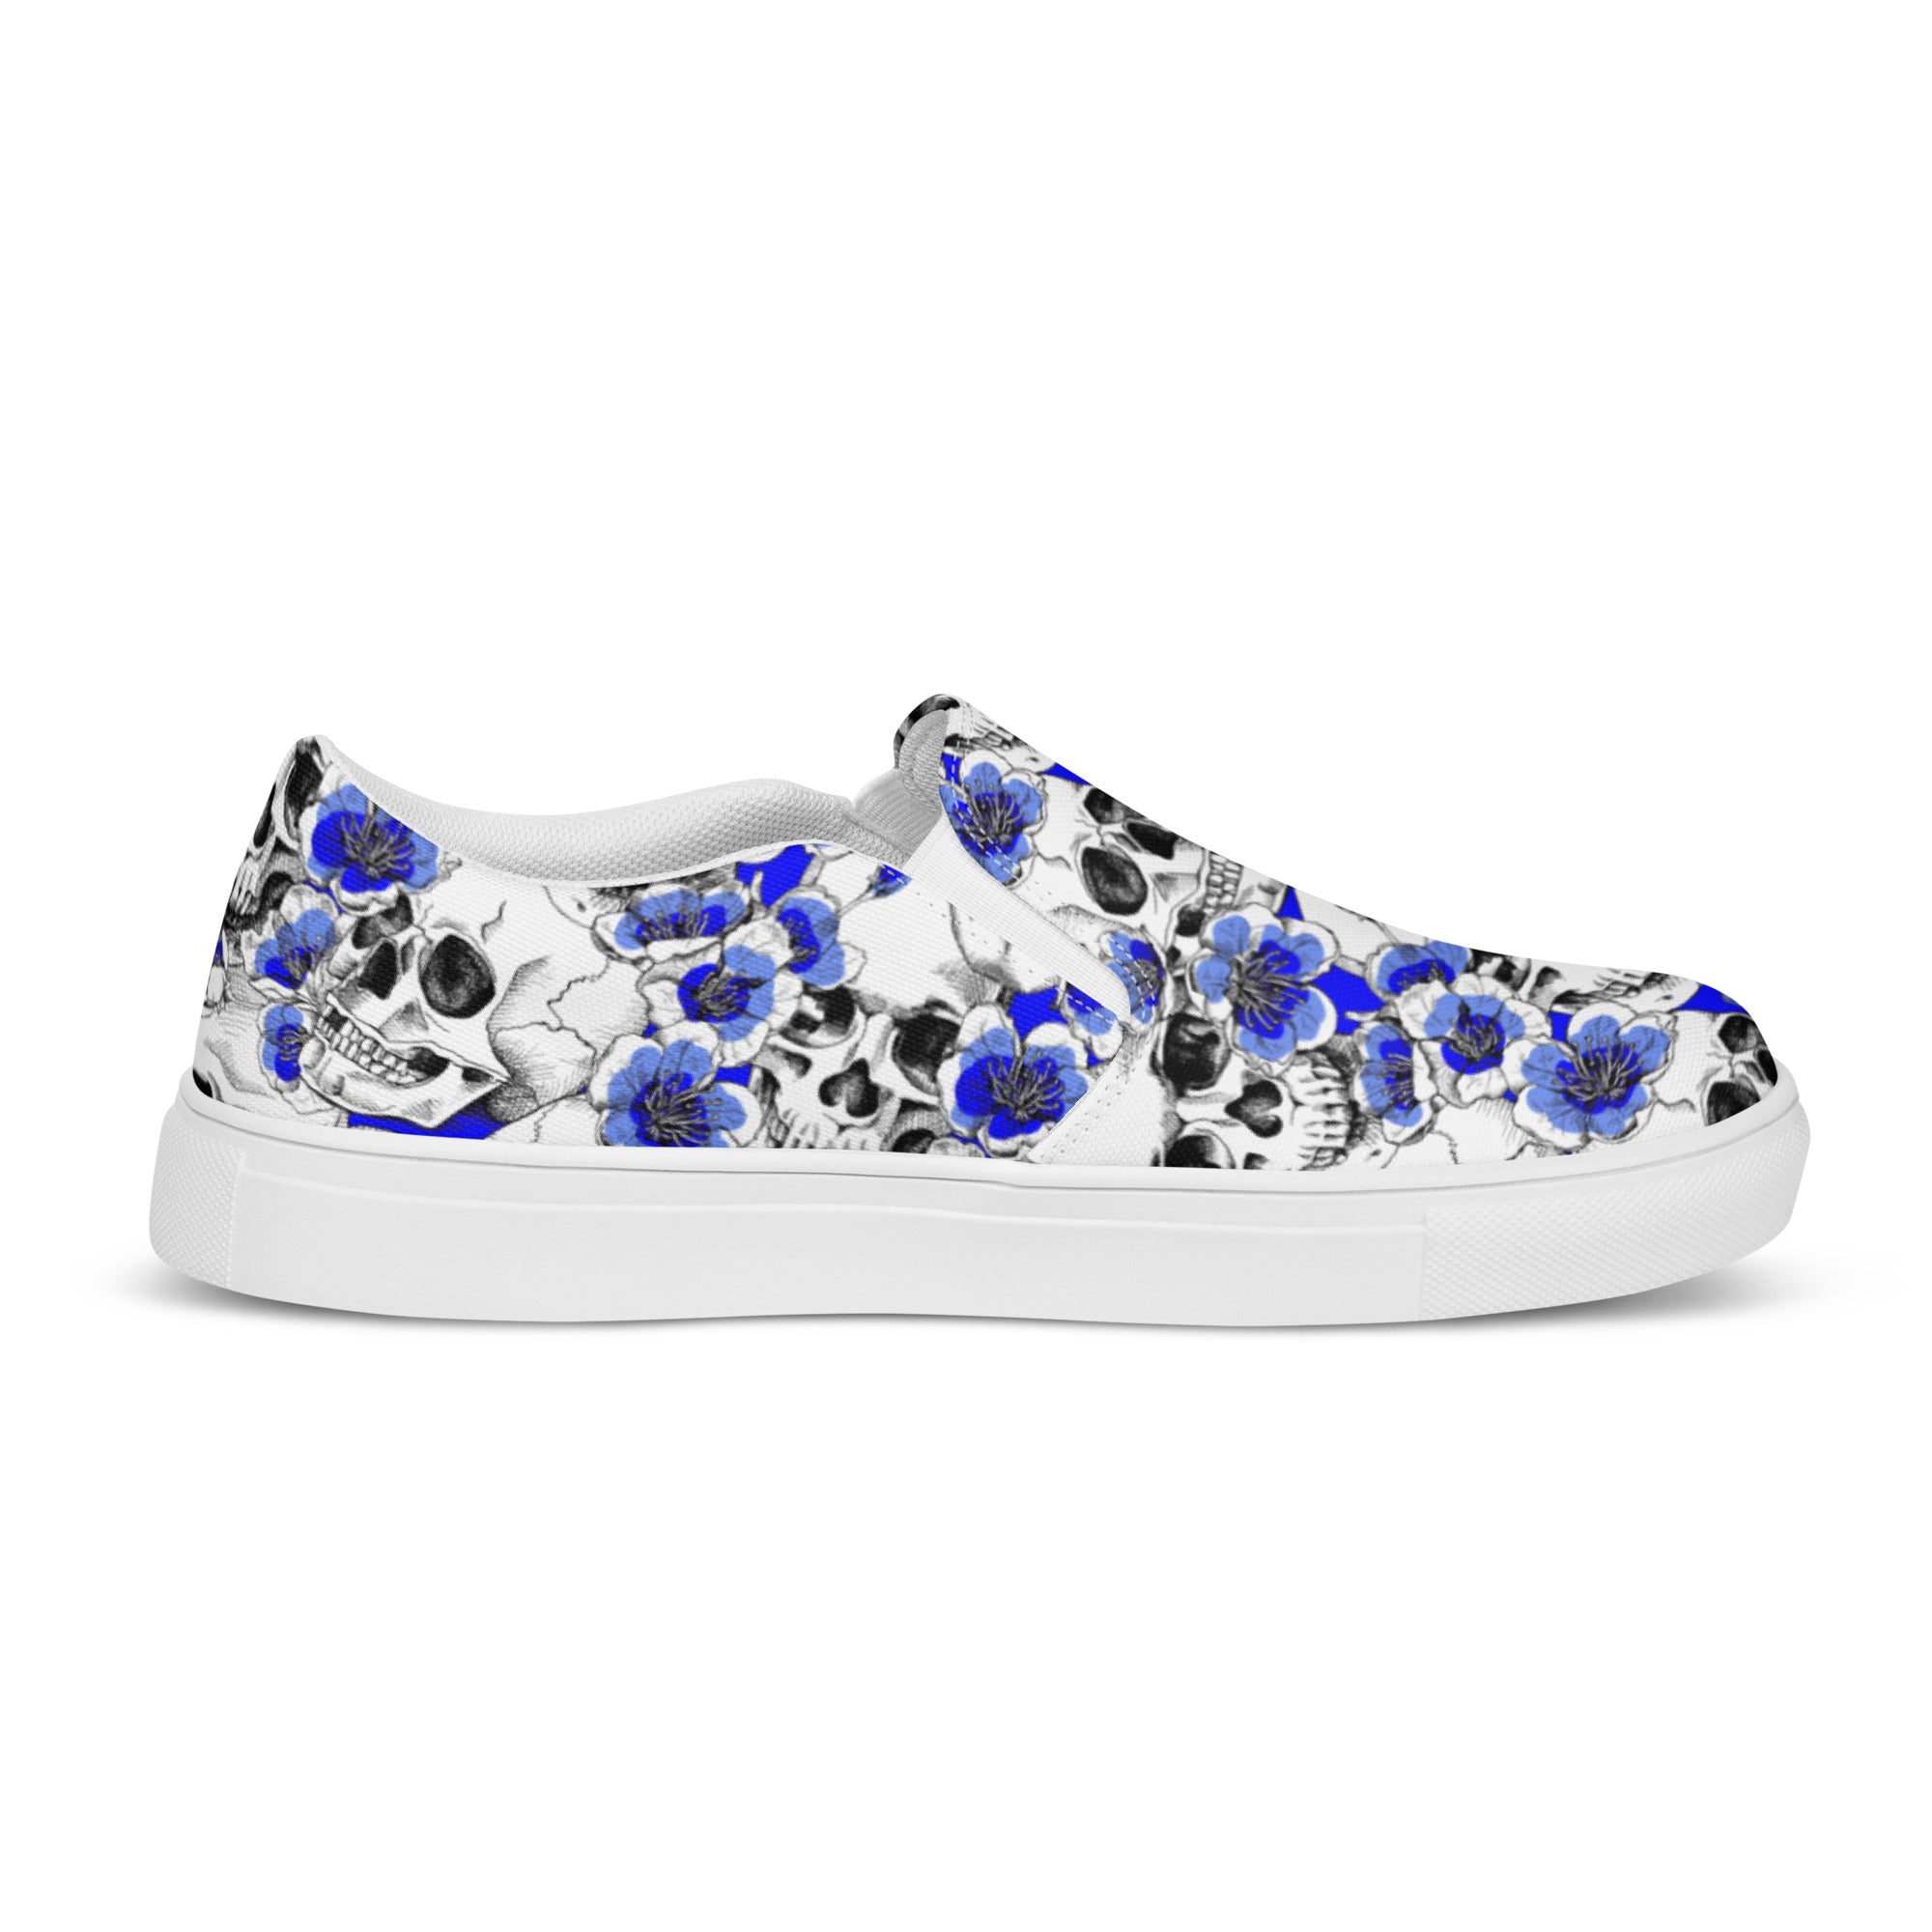 Skulls and Blue Blossoms Women’s Slip-on Canvas Shoes